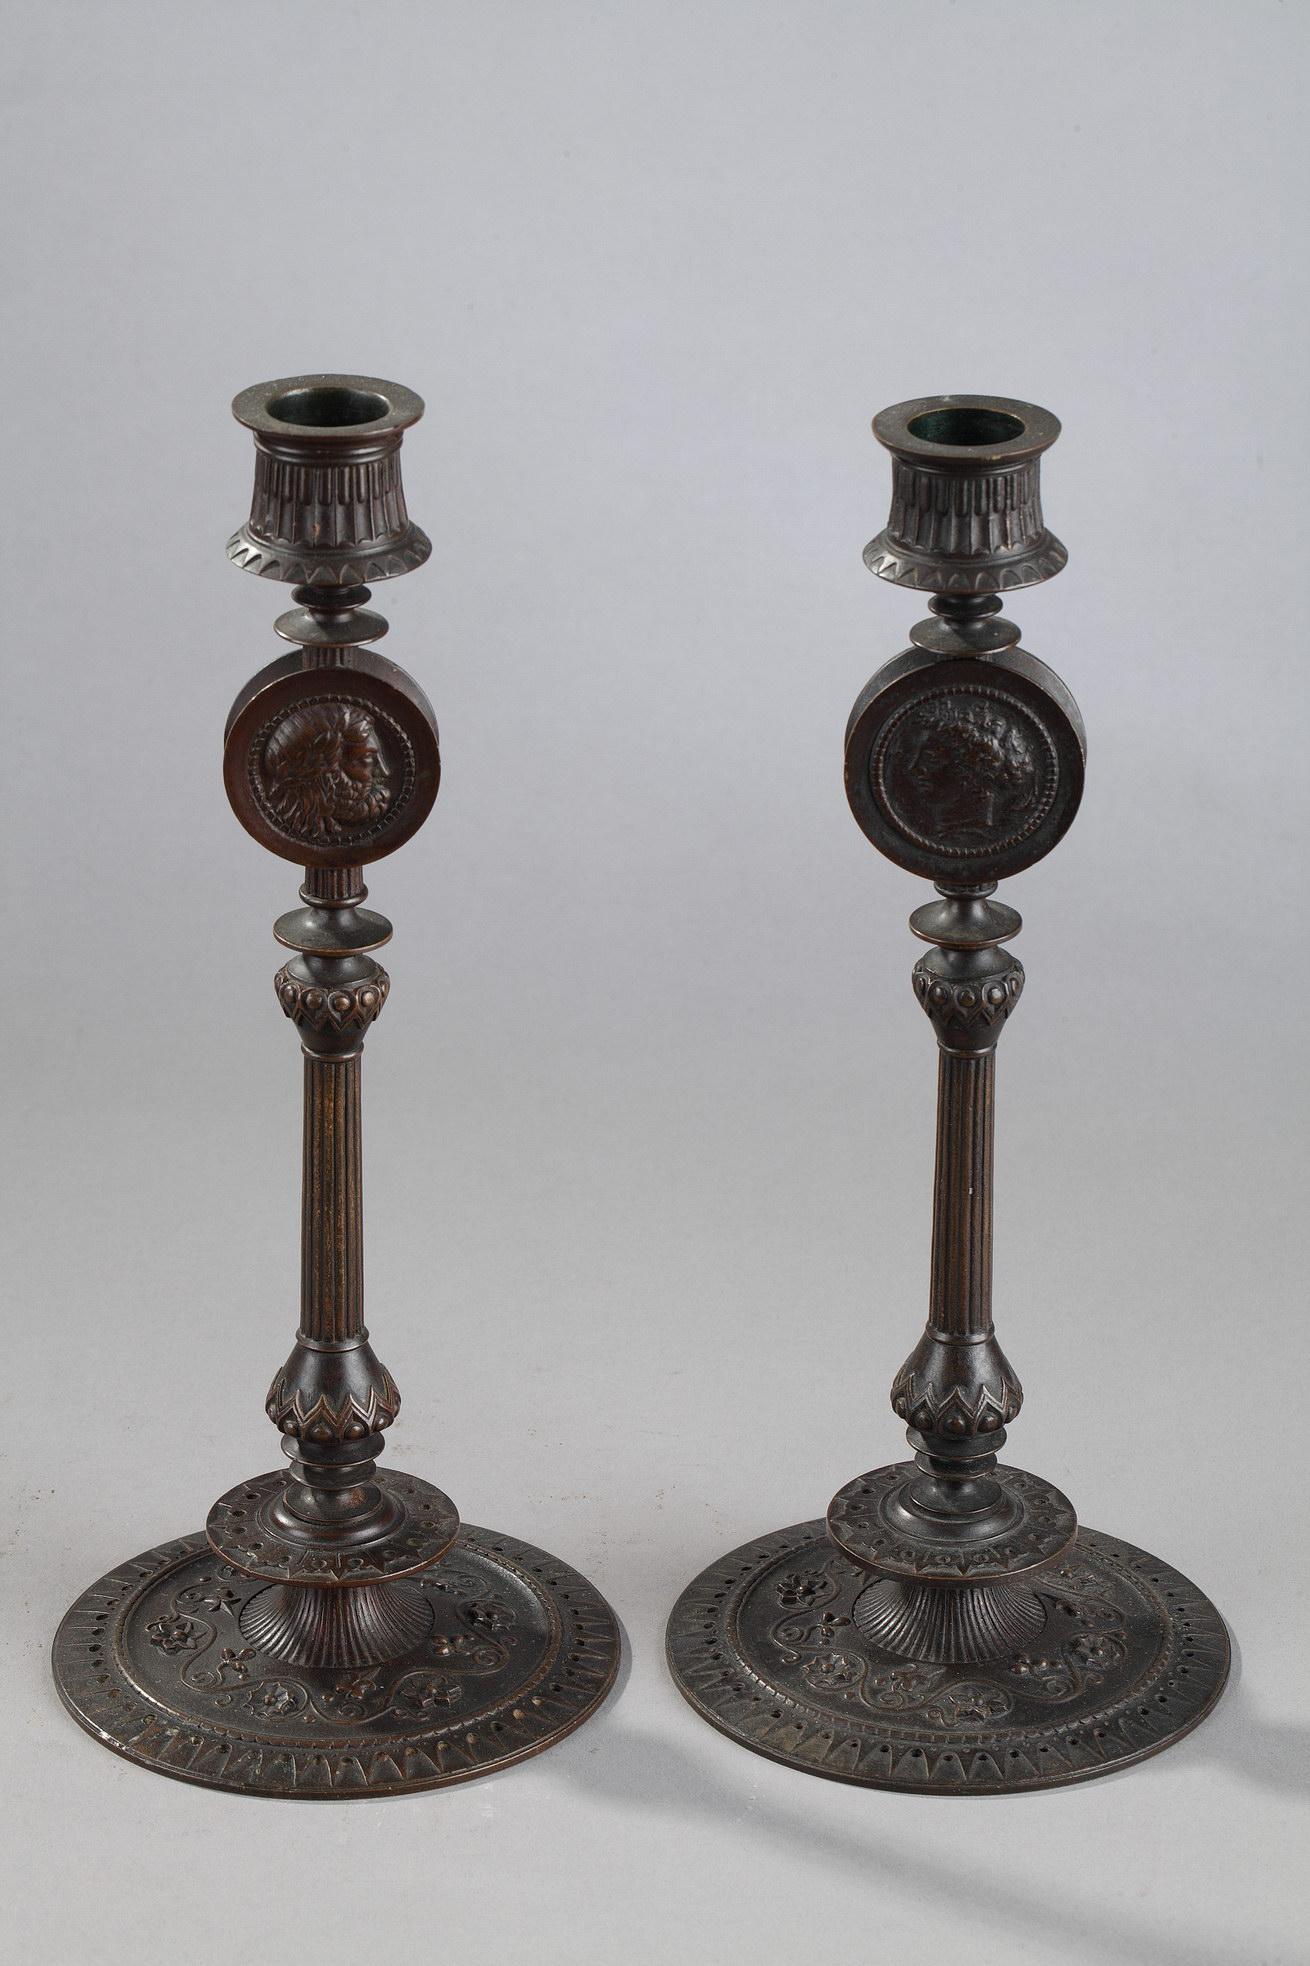 Pair of Candlesticks - French School Sculpture by Antoine-Louis Barye